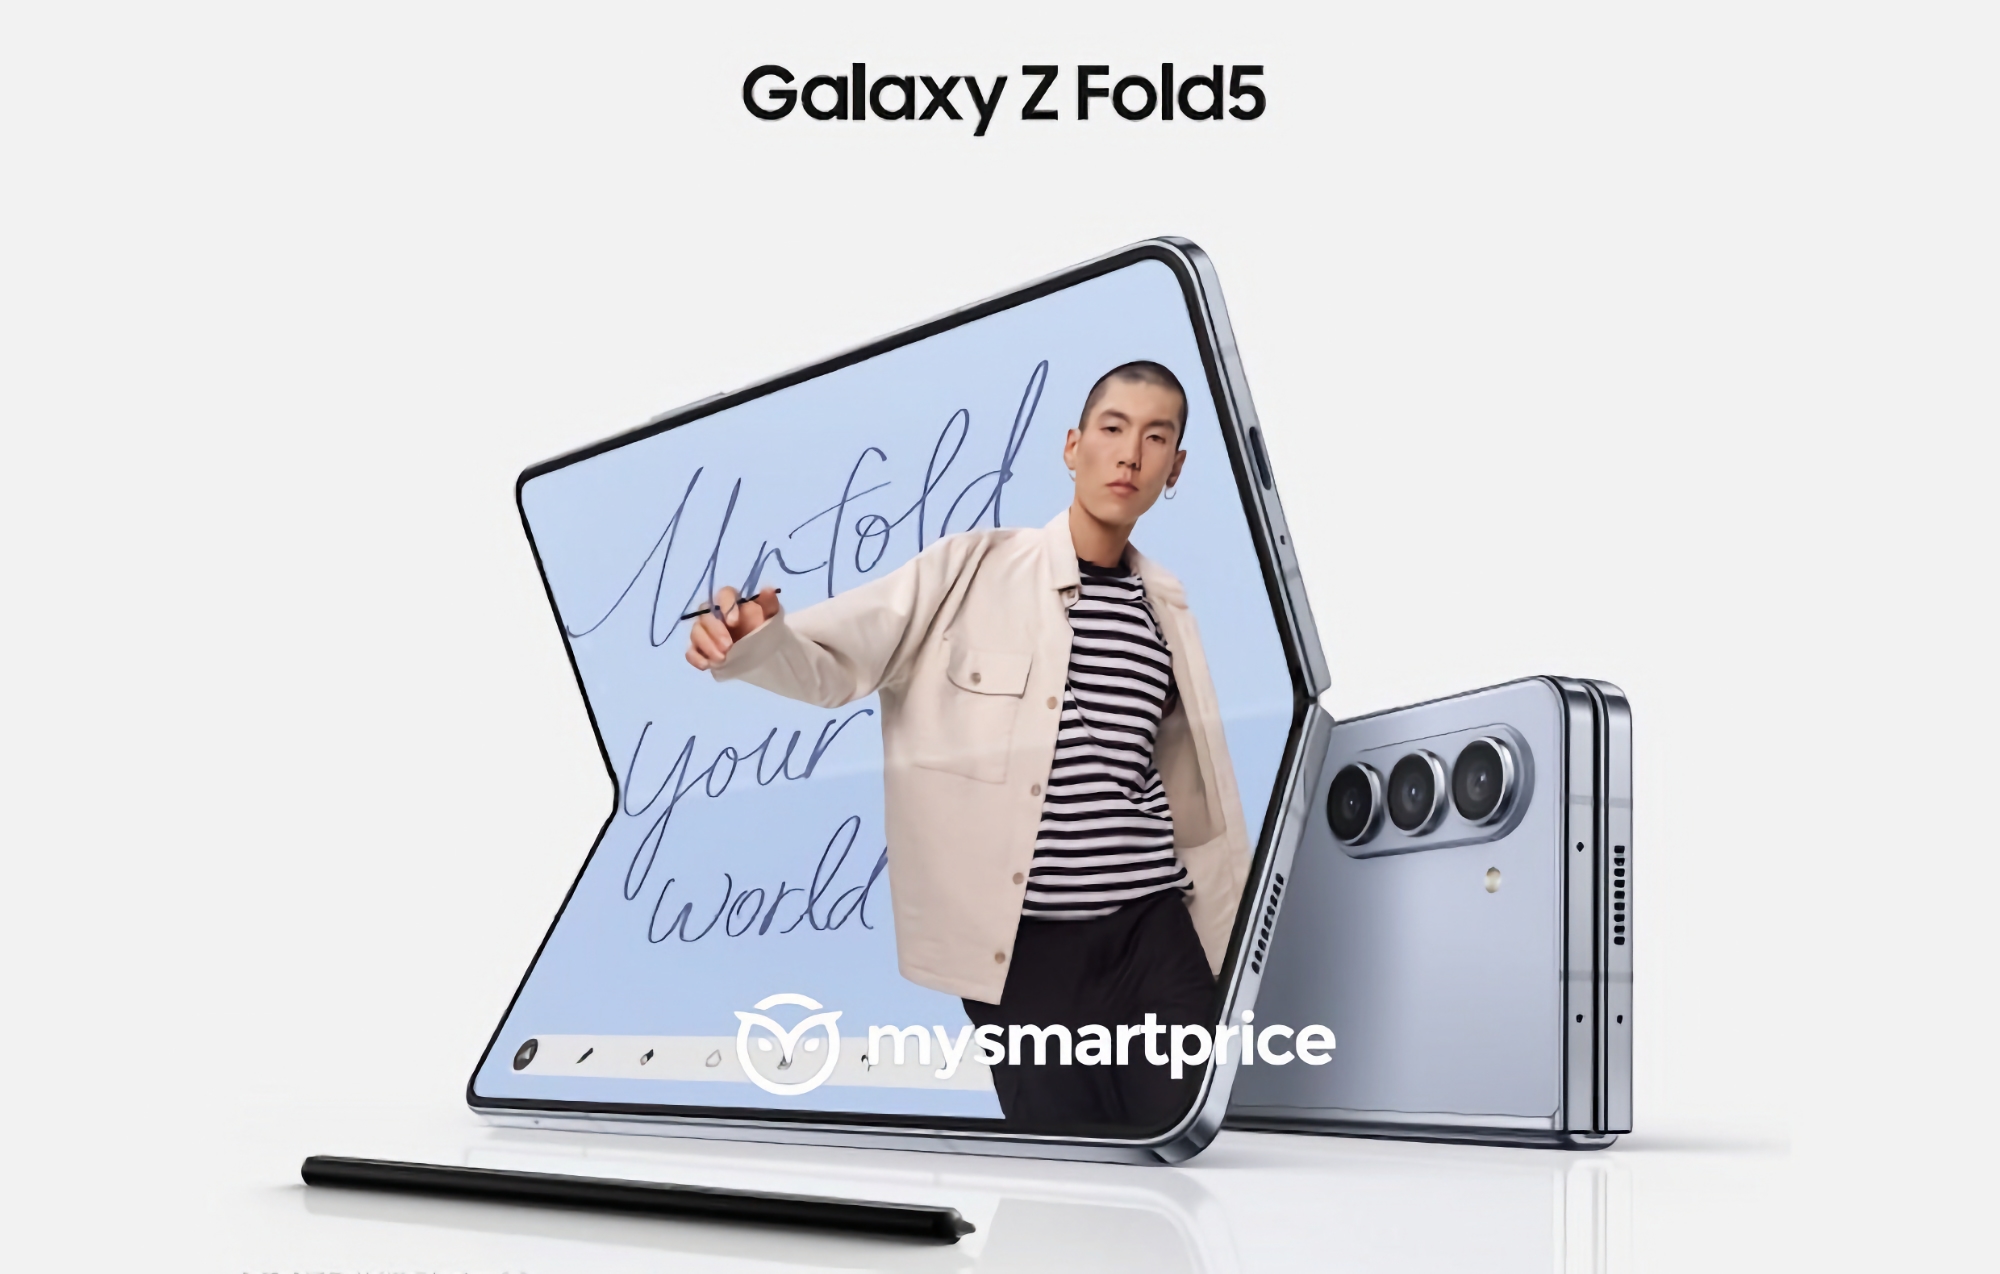 Minimal change: the first official image of the Samsung Galaxy Fold 5 smartphone has surfaced online